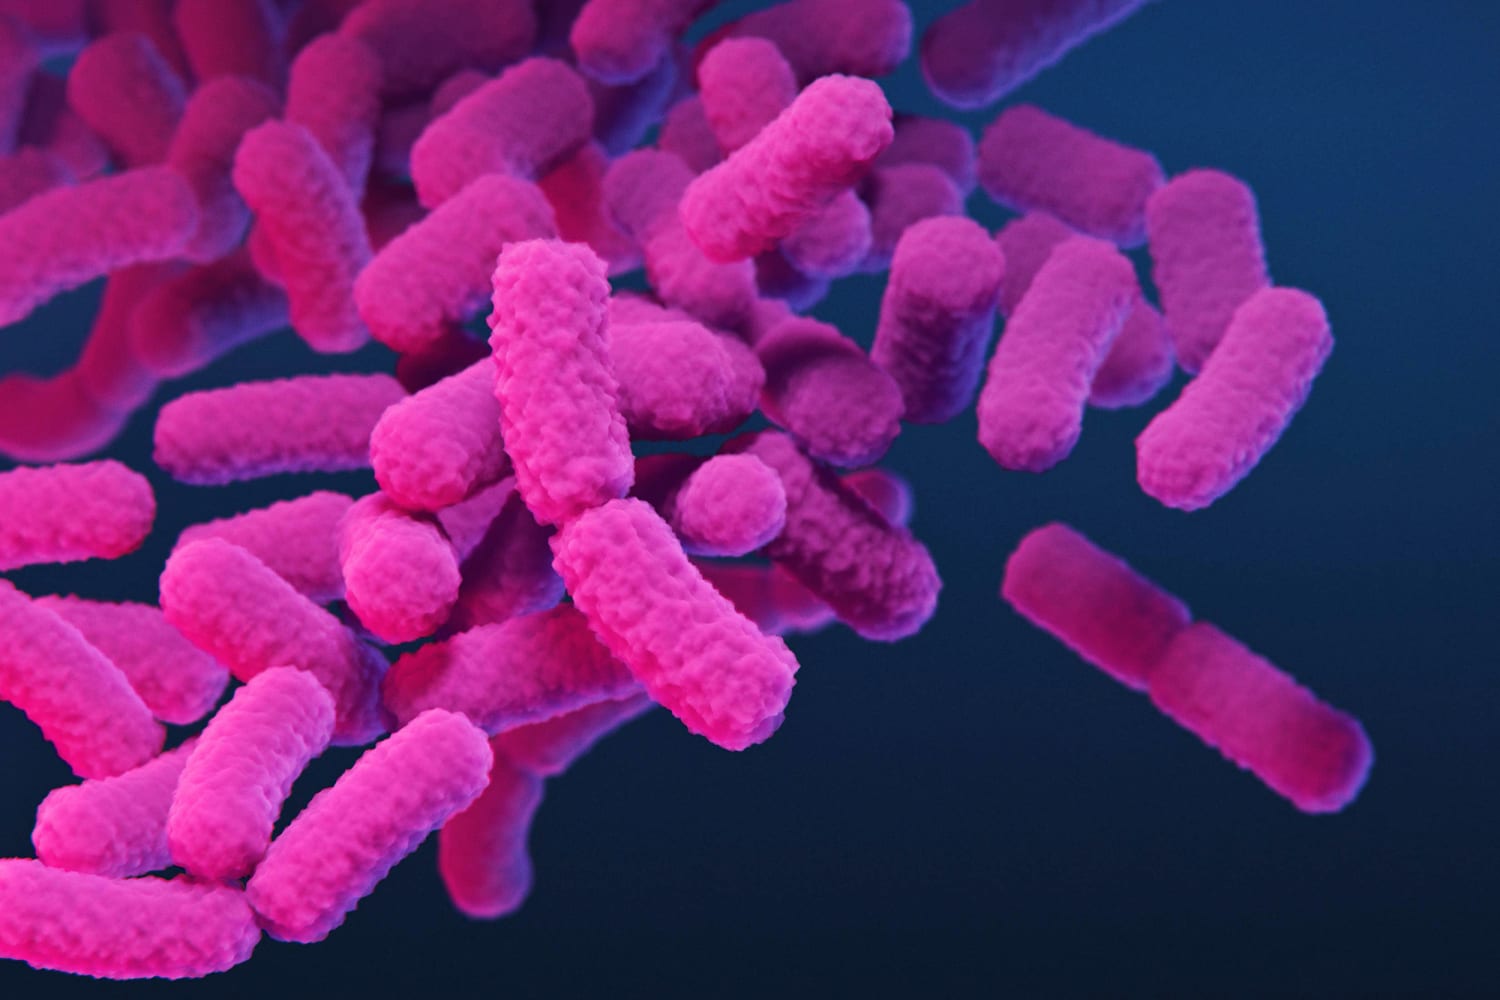 CDC warns about the rise in almost untreatable shigella bacterial infections